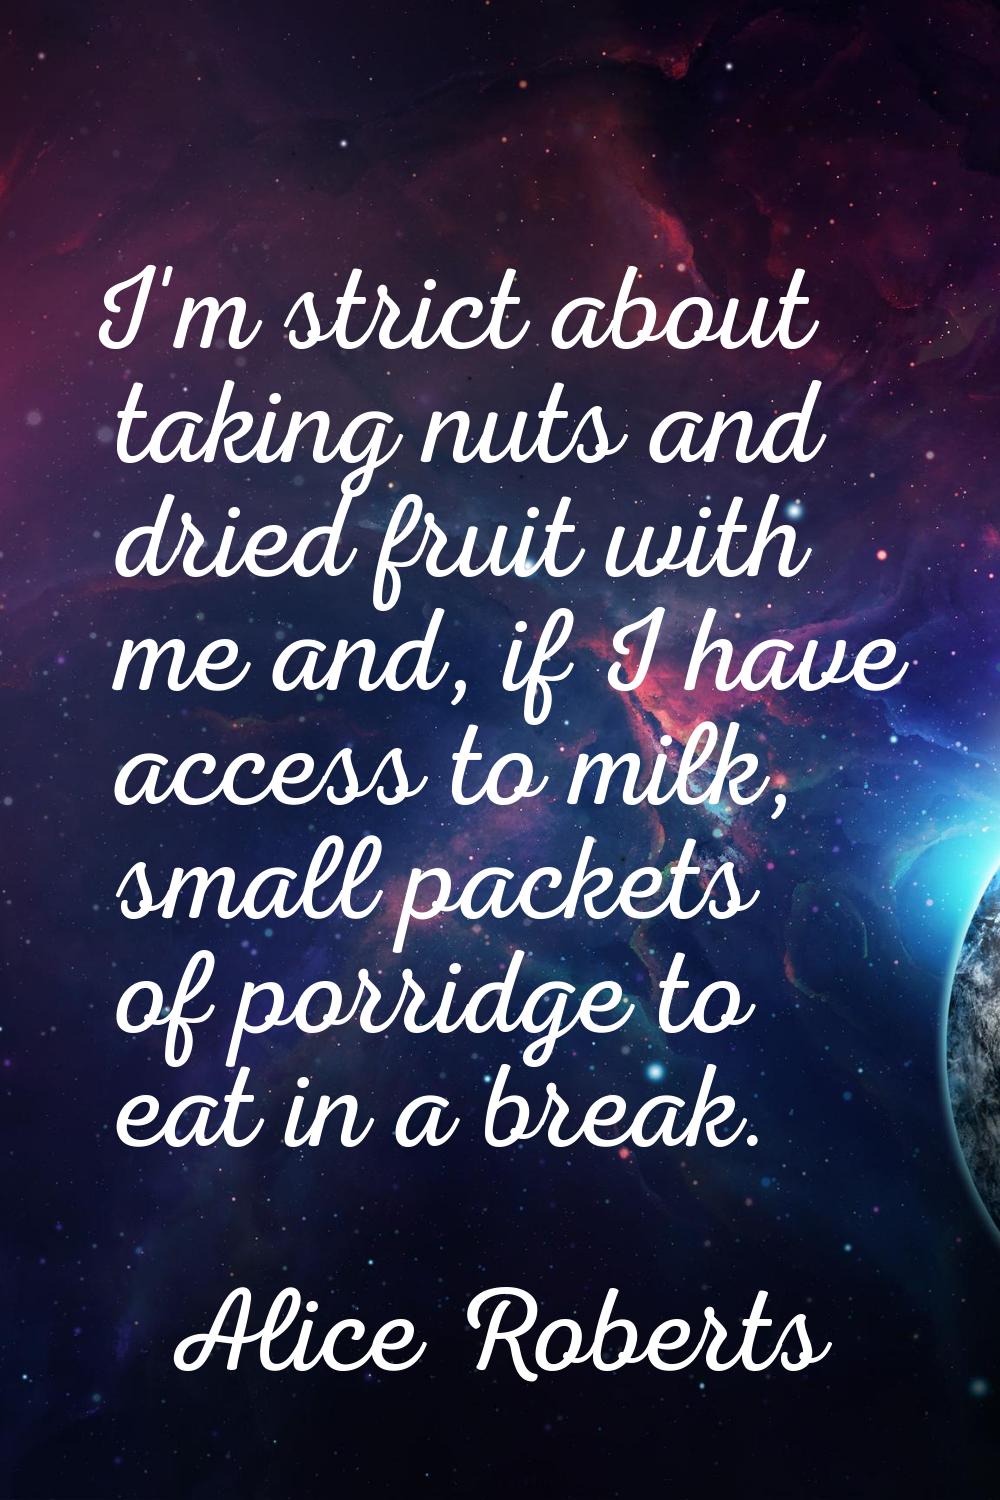 I'm strict about taking nuts and dried fruit with me and, if I have access to milk, small packets o